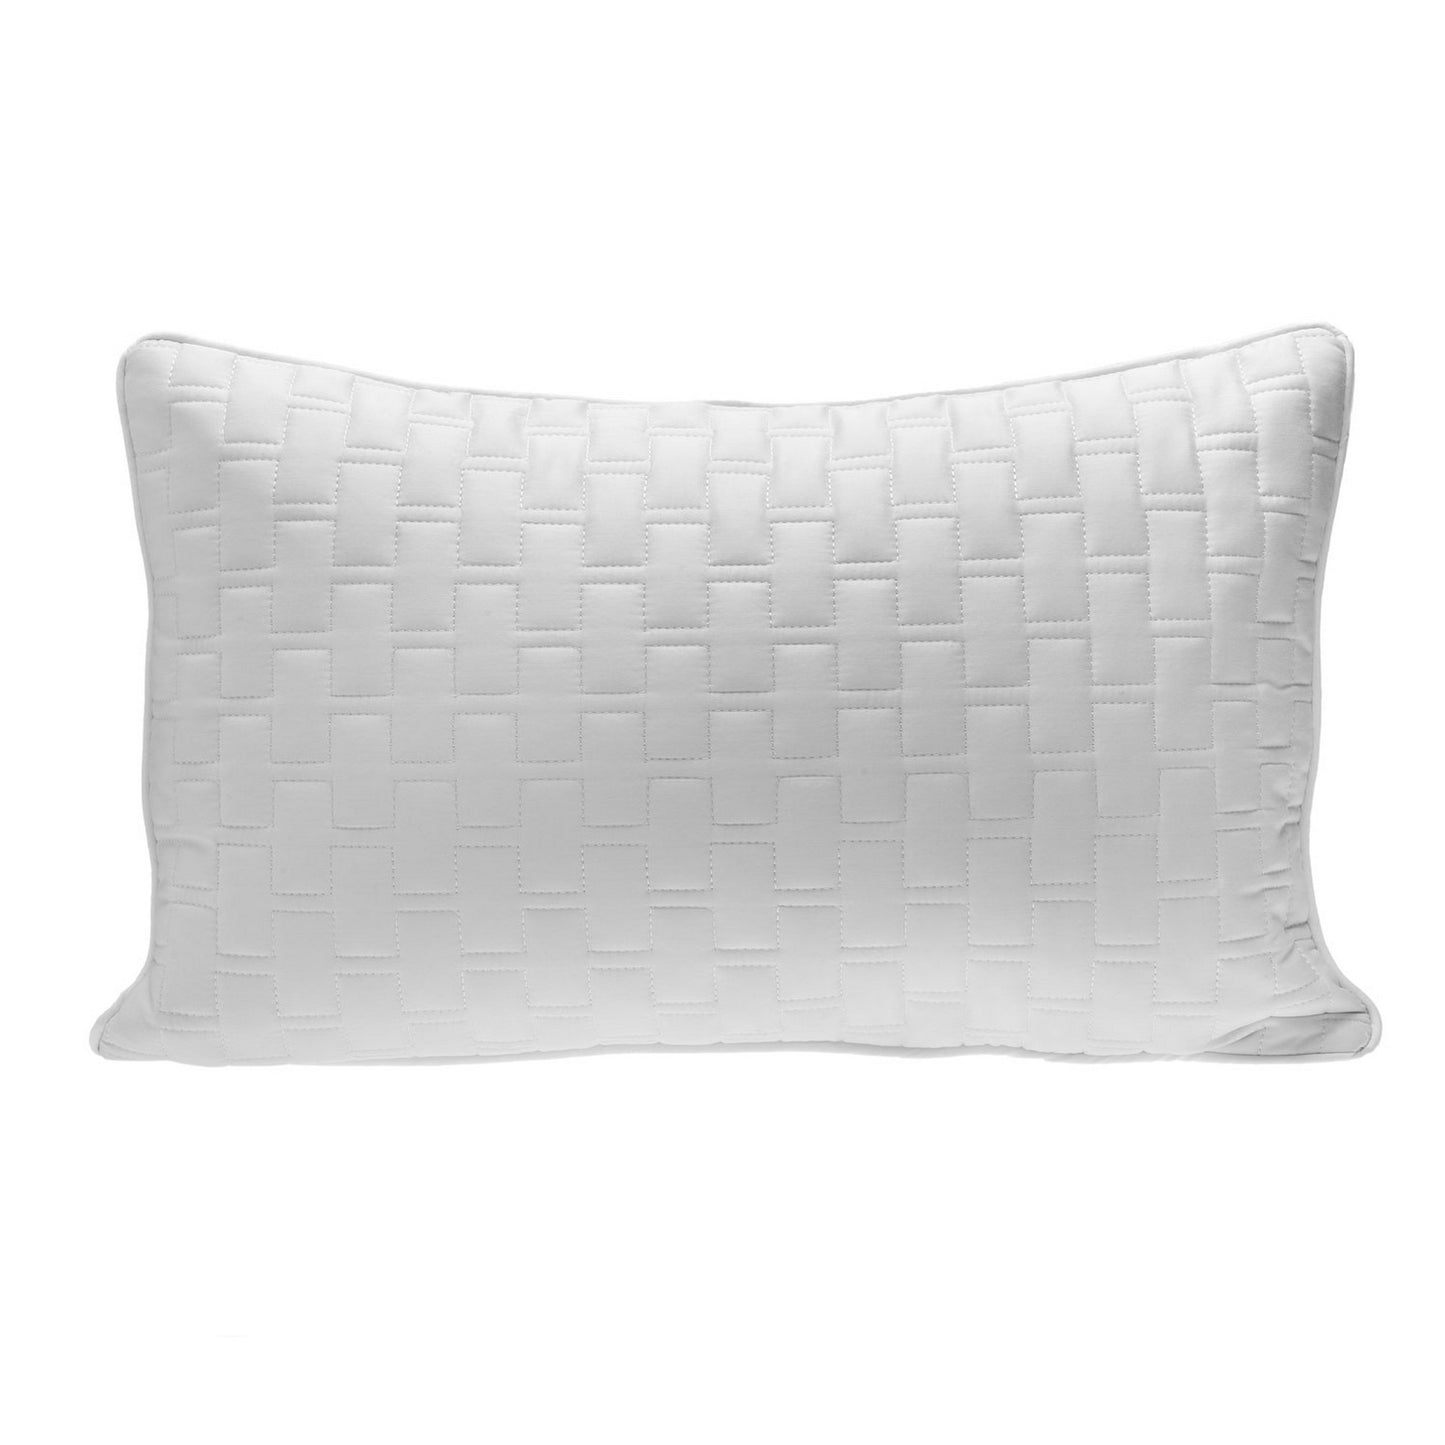 BedVoyage 100% Rayon Viscose Bamboo Quilted Decorative Pillow